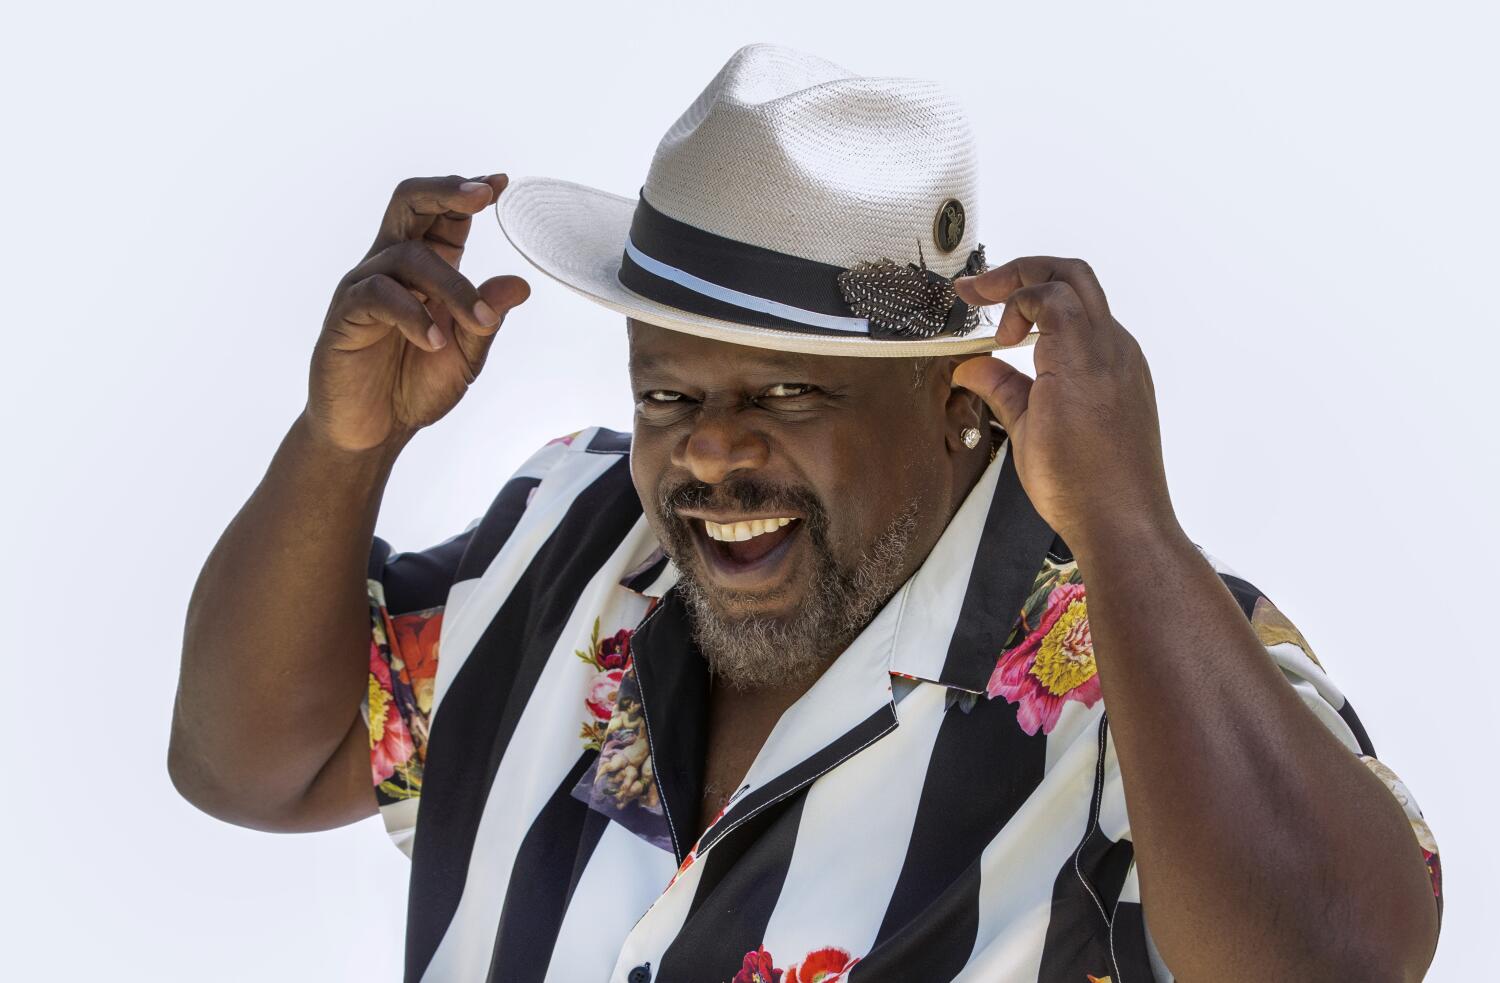 cedric-the-entertainer-uses-his-punchlines-to-branch-out-and-give-back-during-netflix-is-a-joke